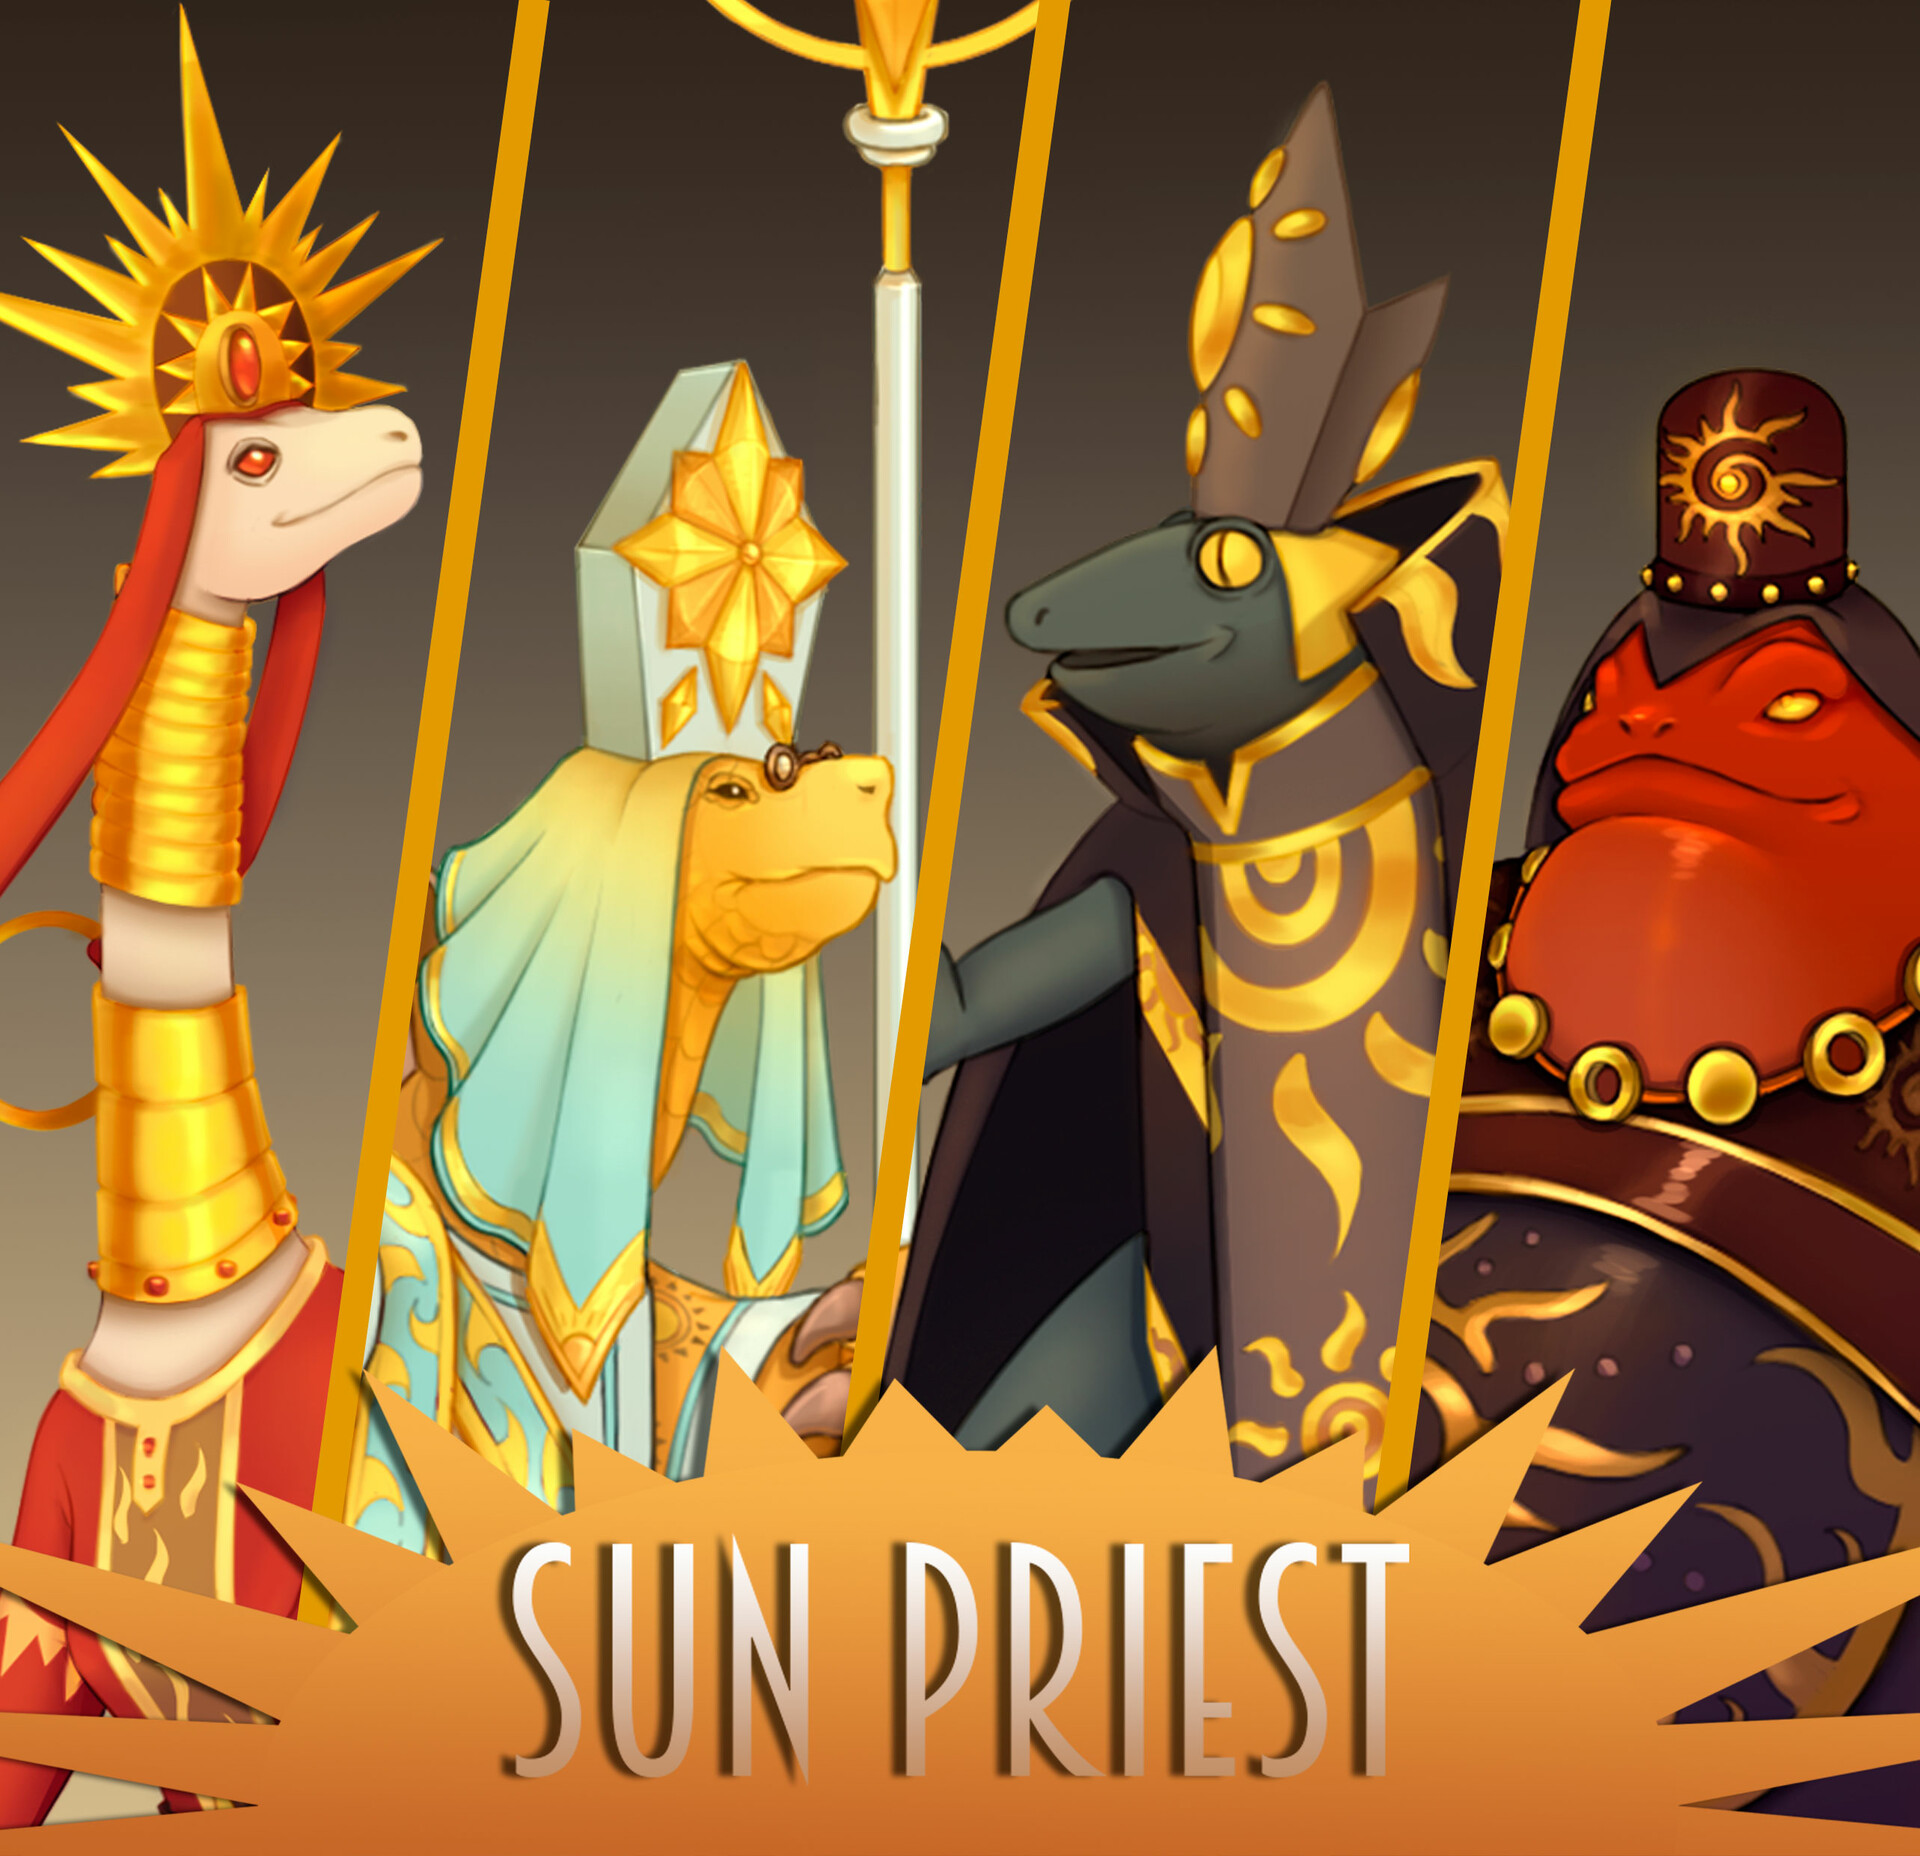 The healing priest of the sun